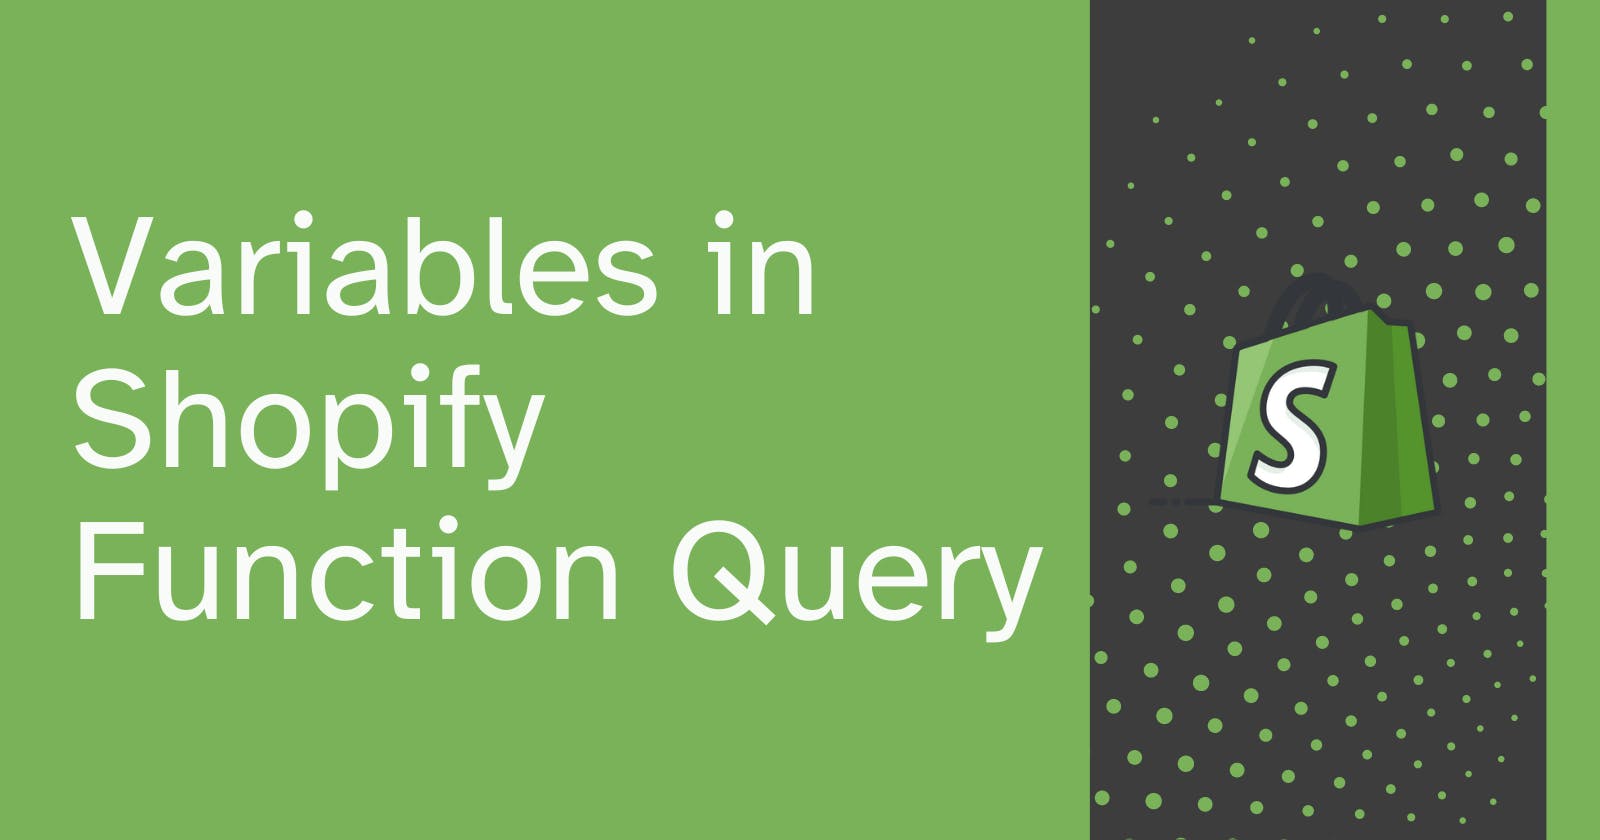 Using variables in Shopify Function Query